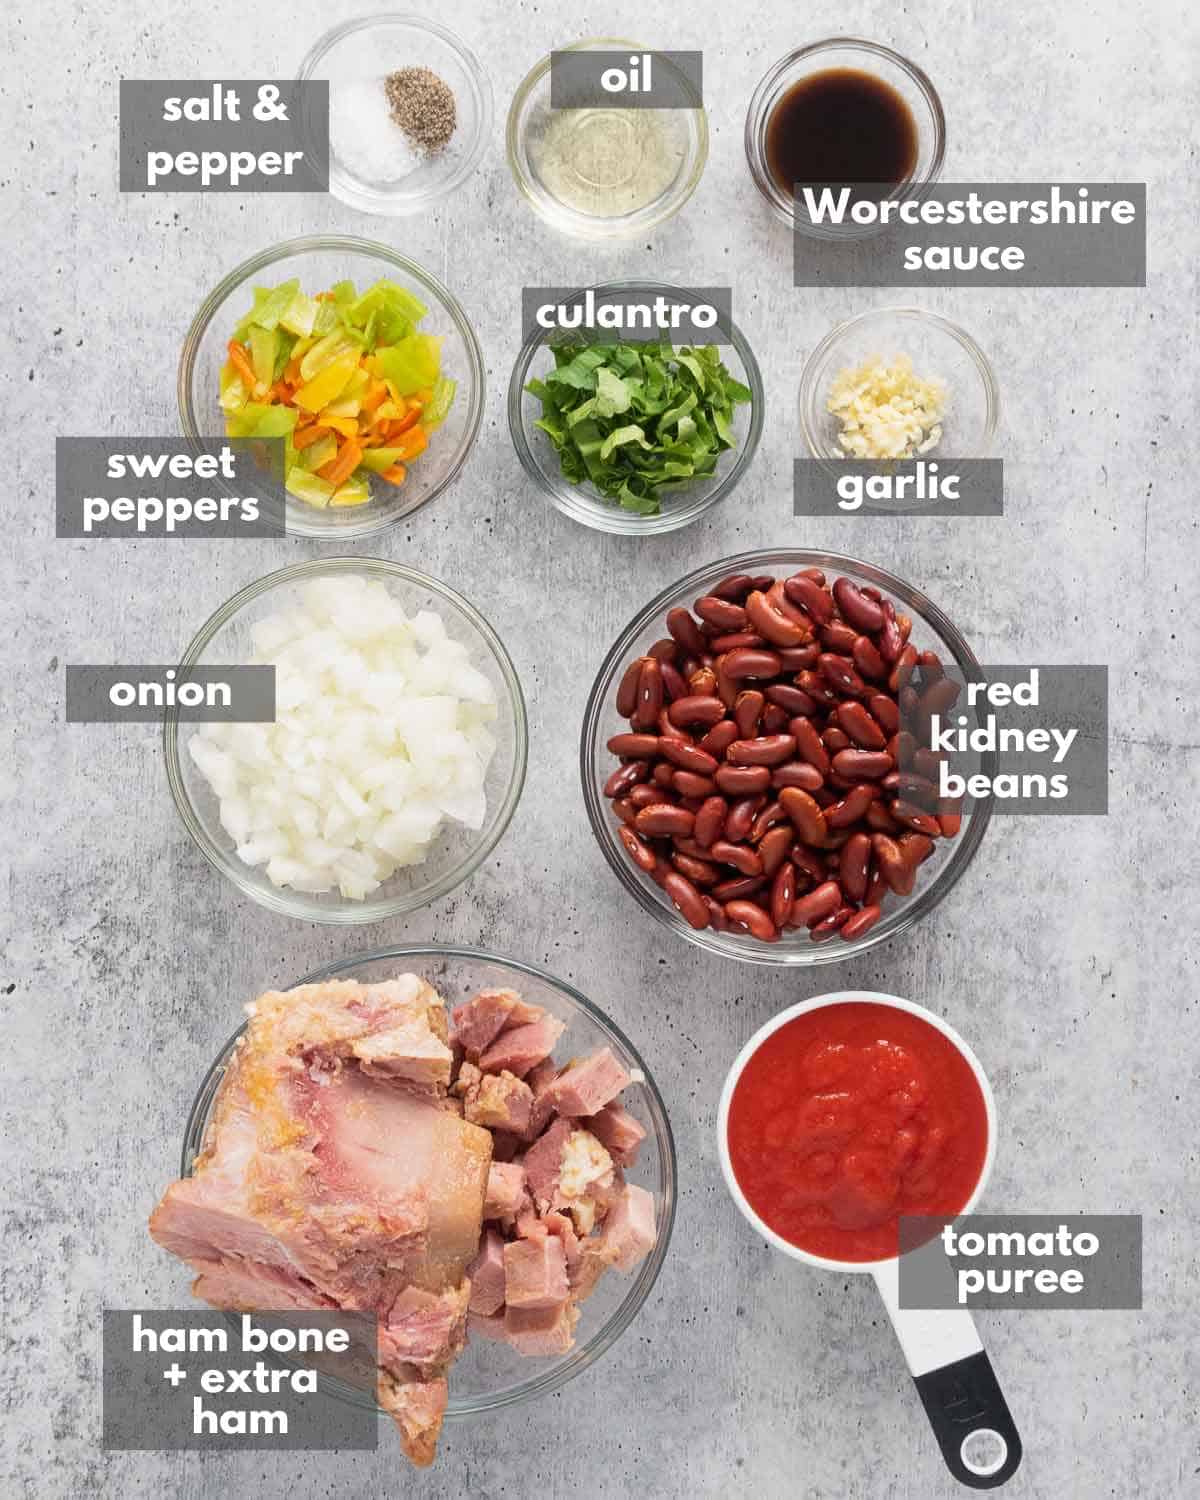 A top view of ingredients to make red kidney beans and ham bone.